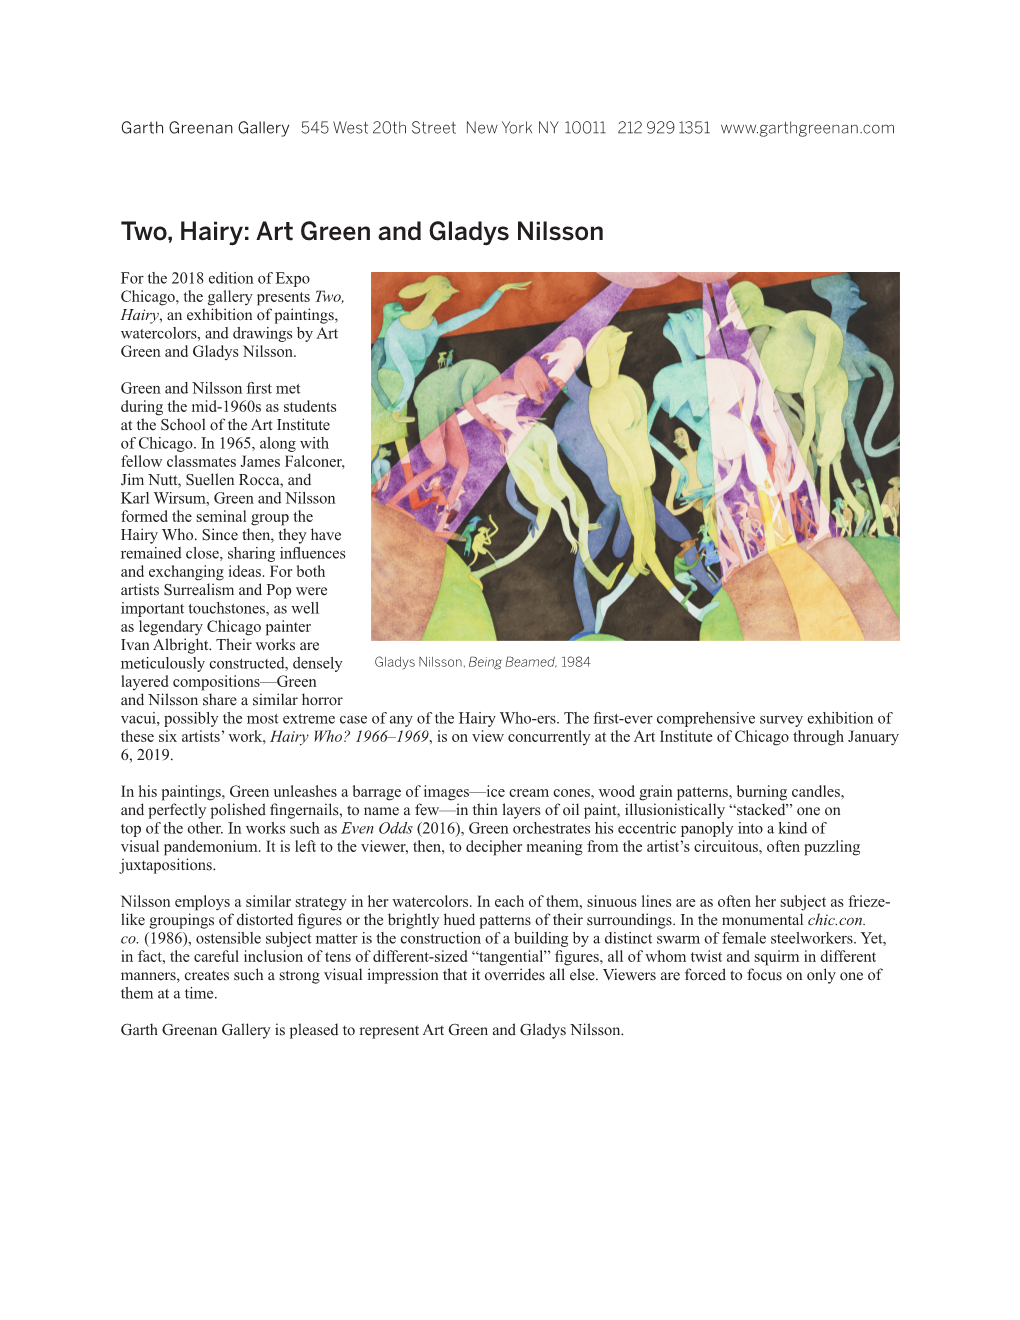 Art Green and Gladys Nilsson Press Release